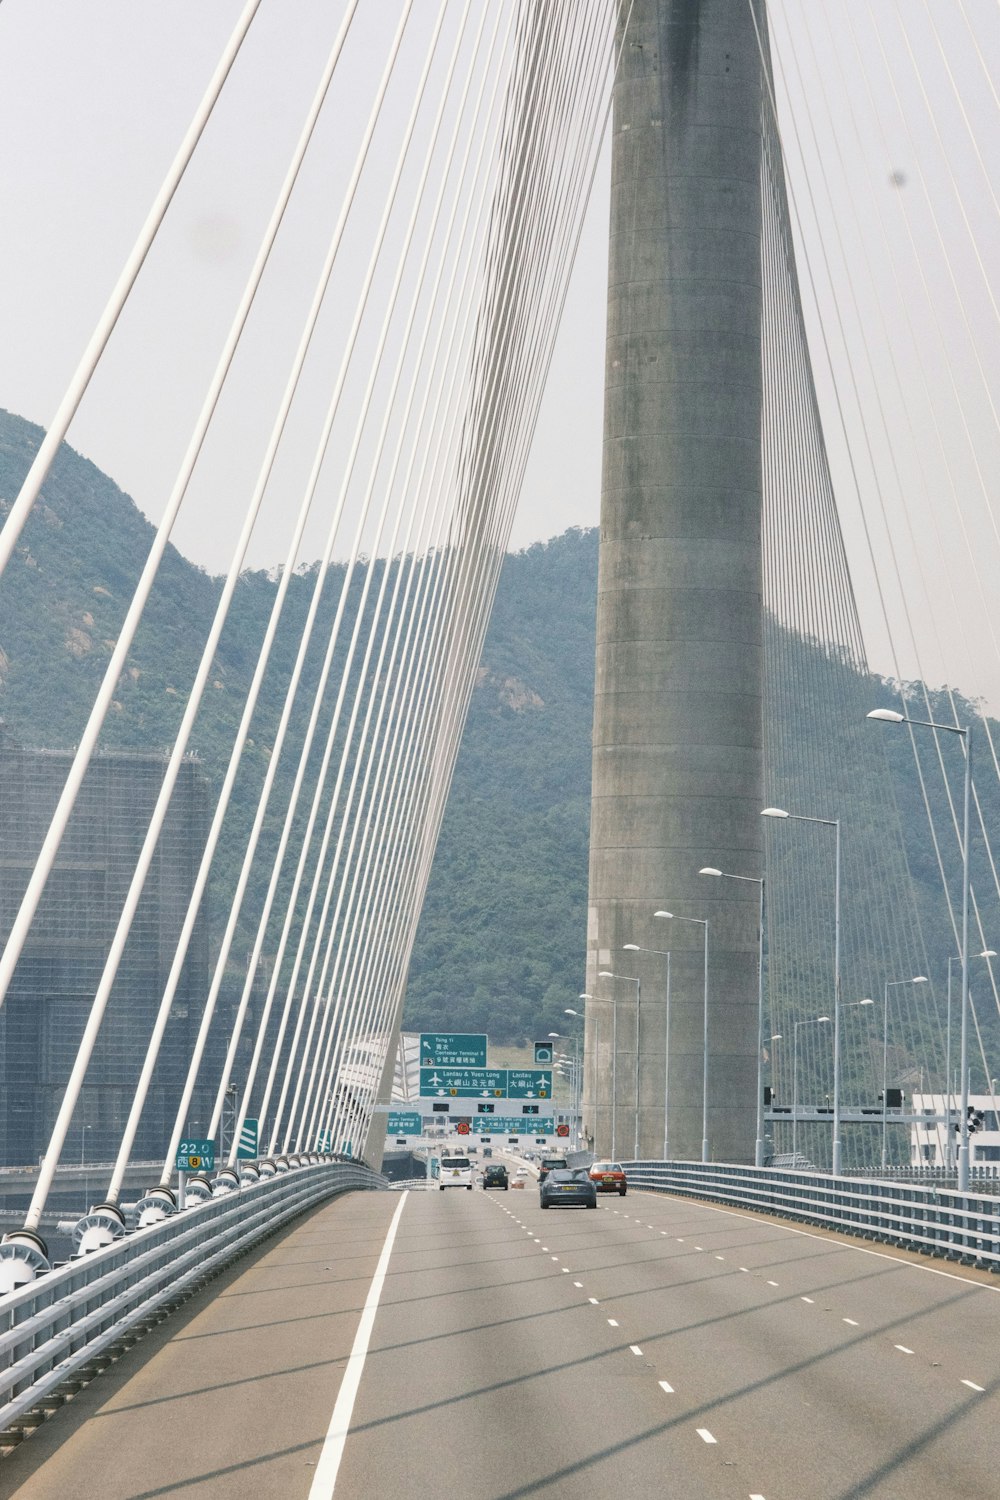 a view of a very tall bridge with cars driving on it